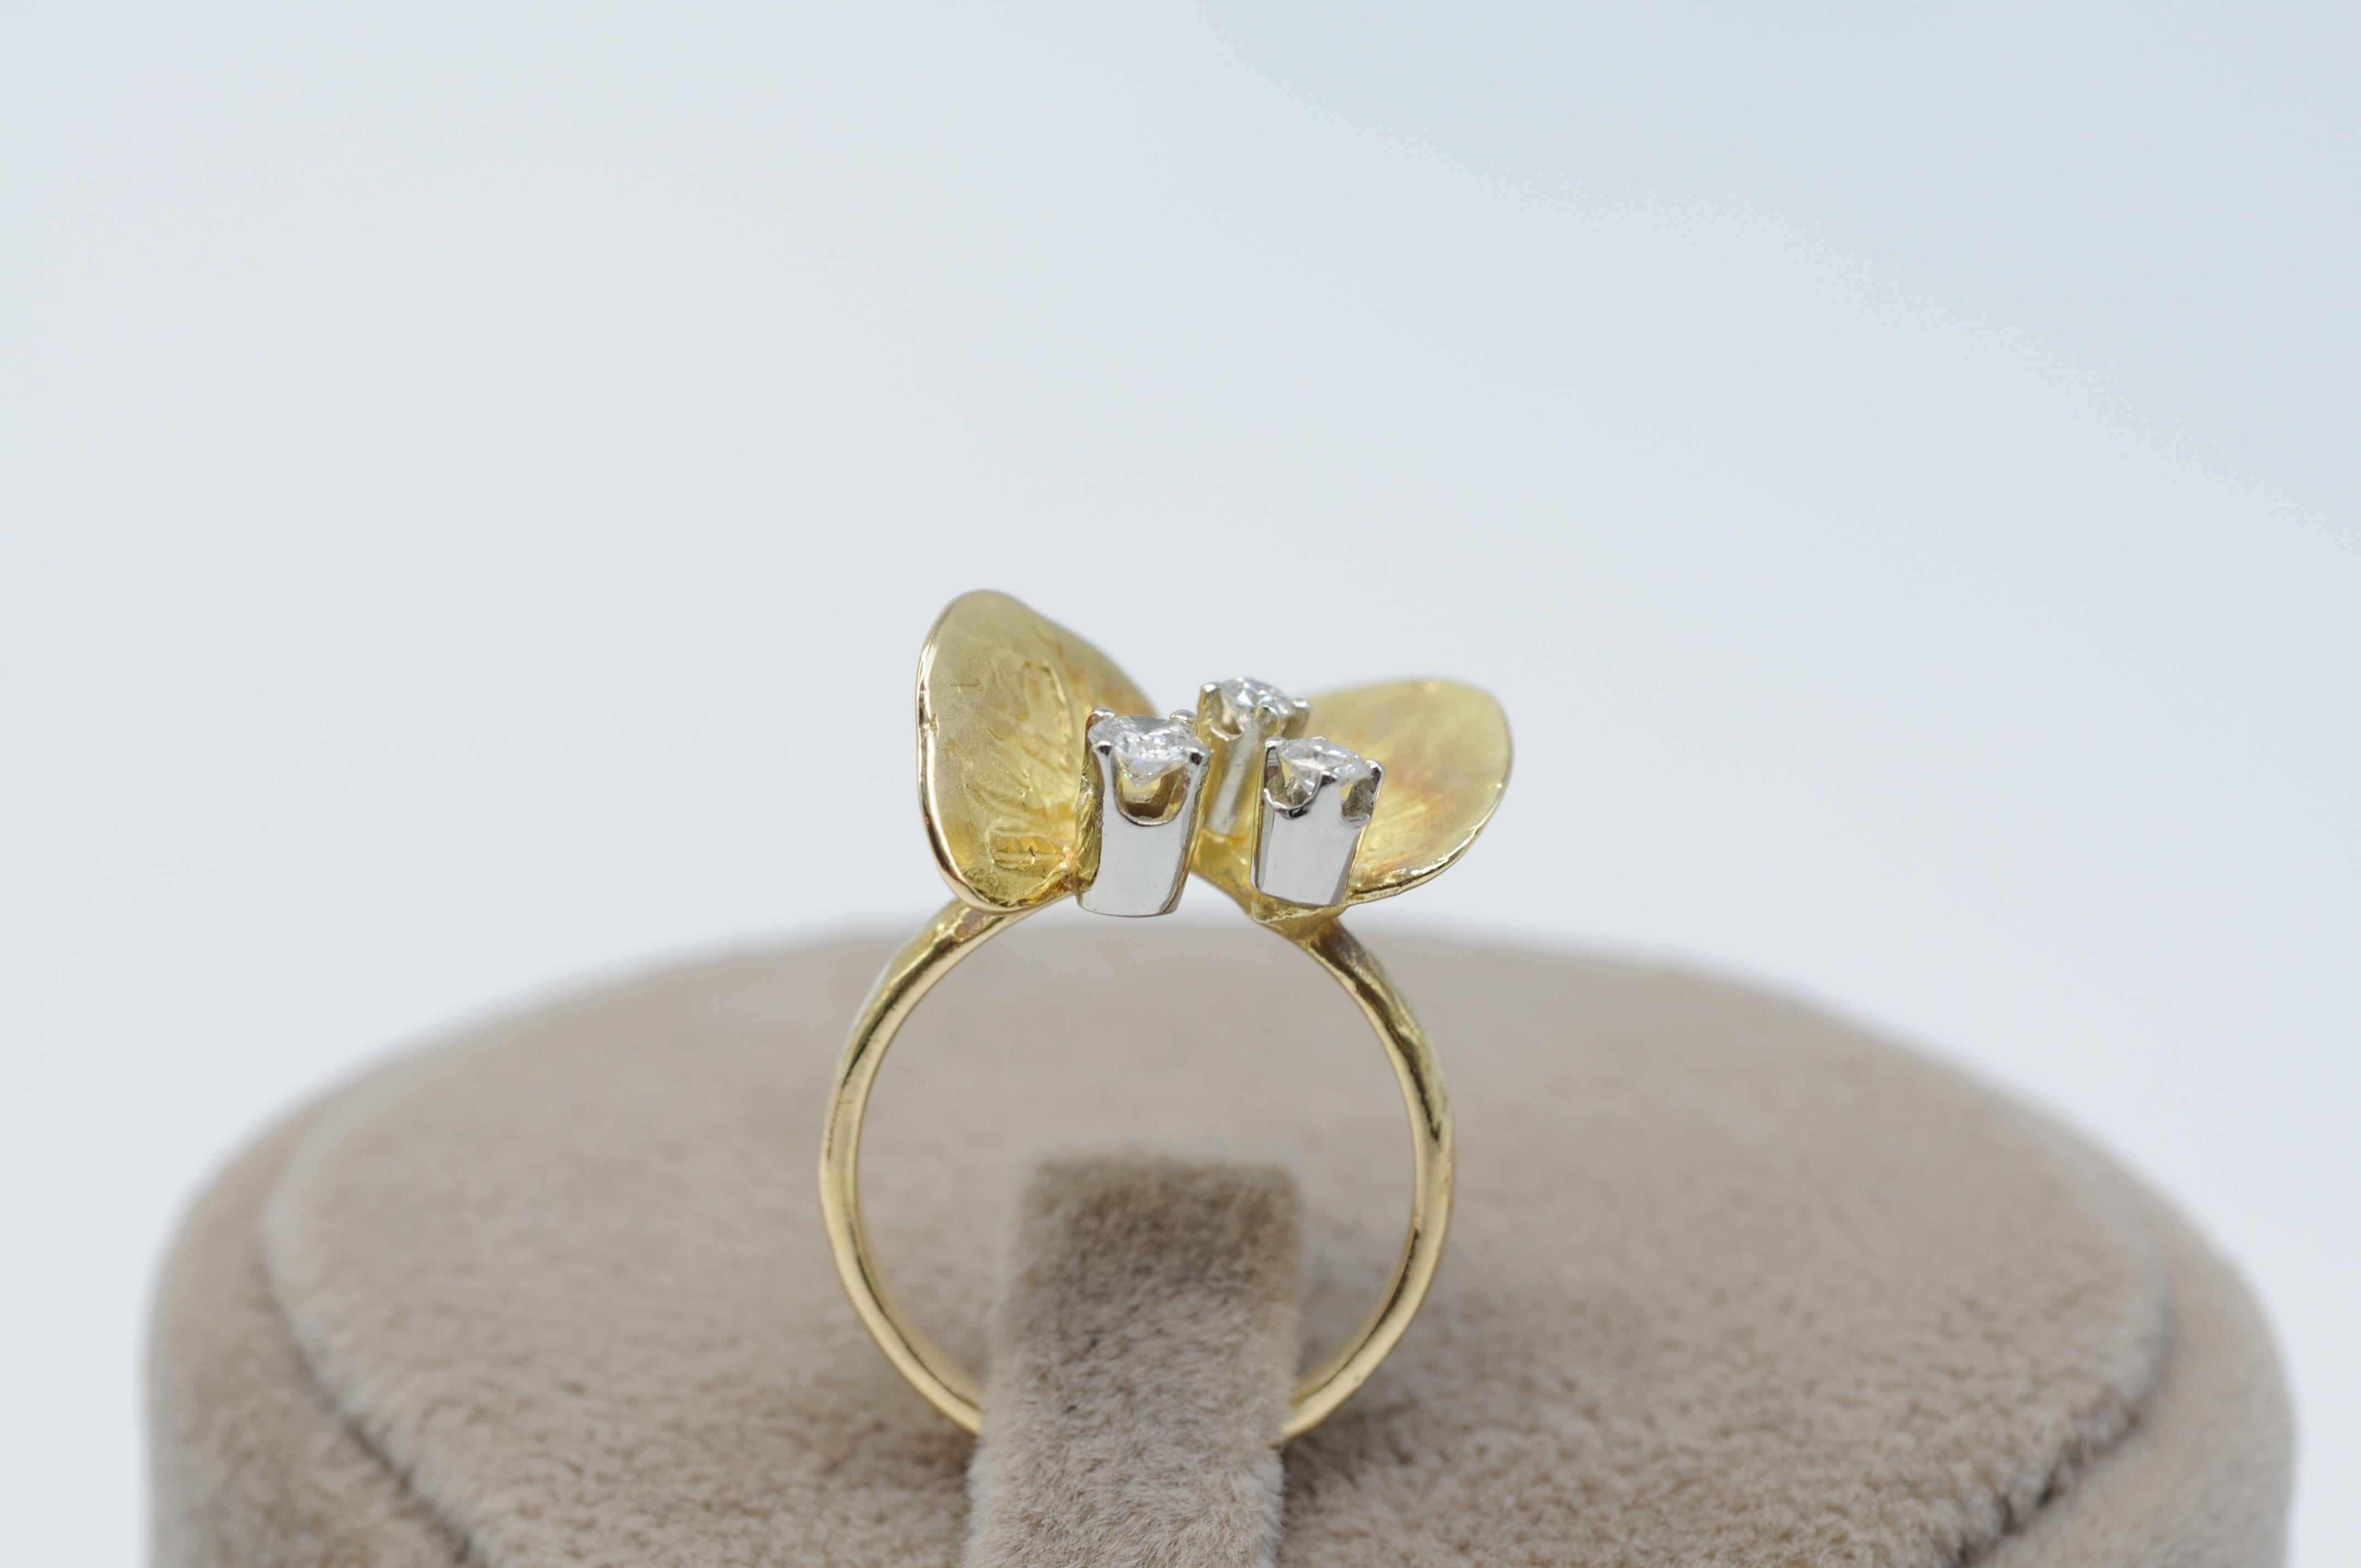 Brilliant Cut Majestic gold ring with diamonds by master goldsmith Wurzbacher For Sale